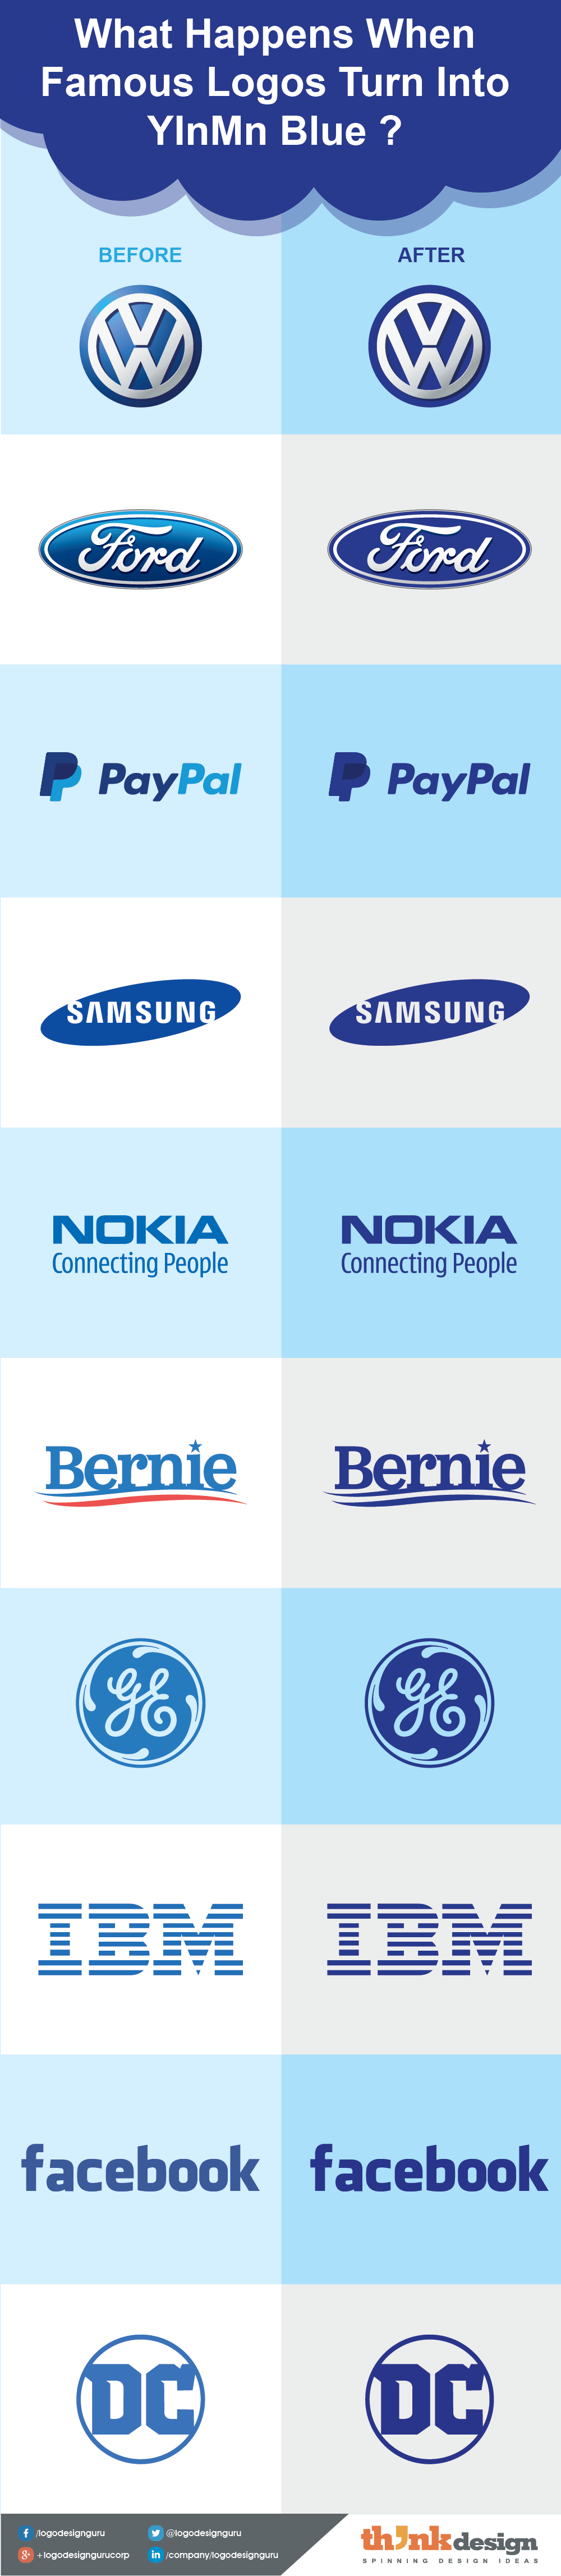 Popular Blue Logo - Can YInMn Blue Change The Meaning Of Famous Logos?